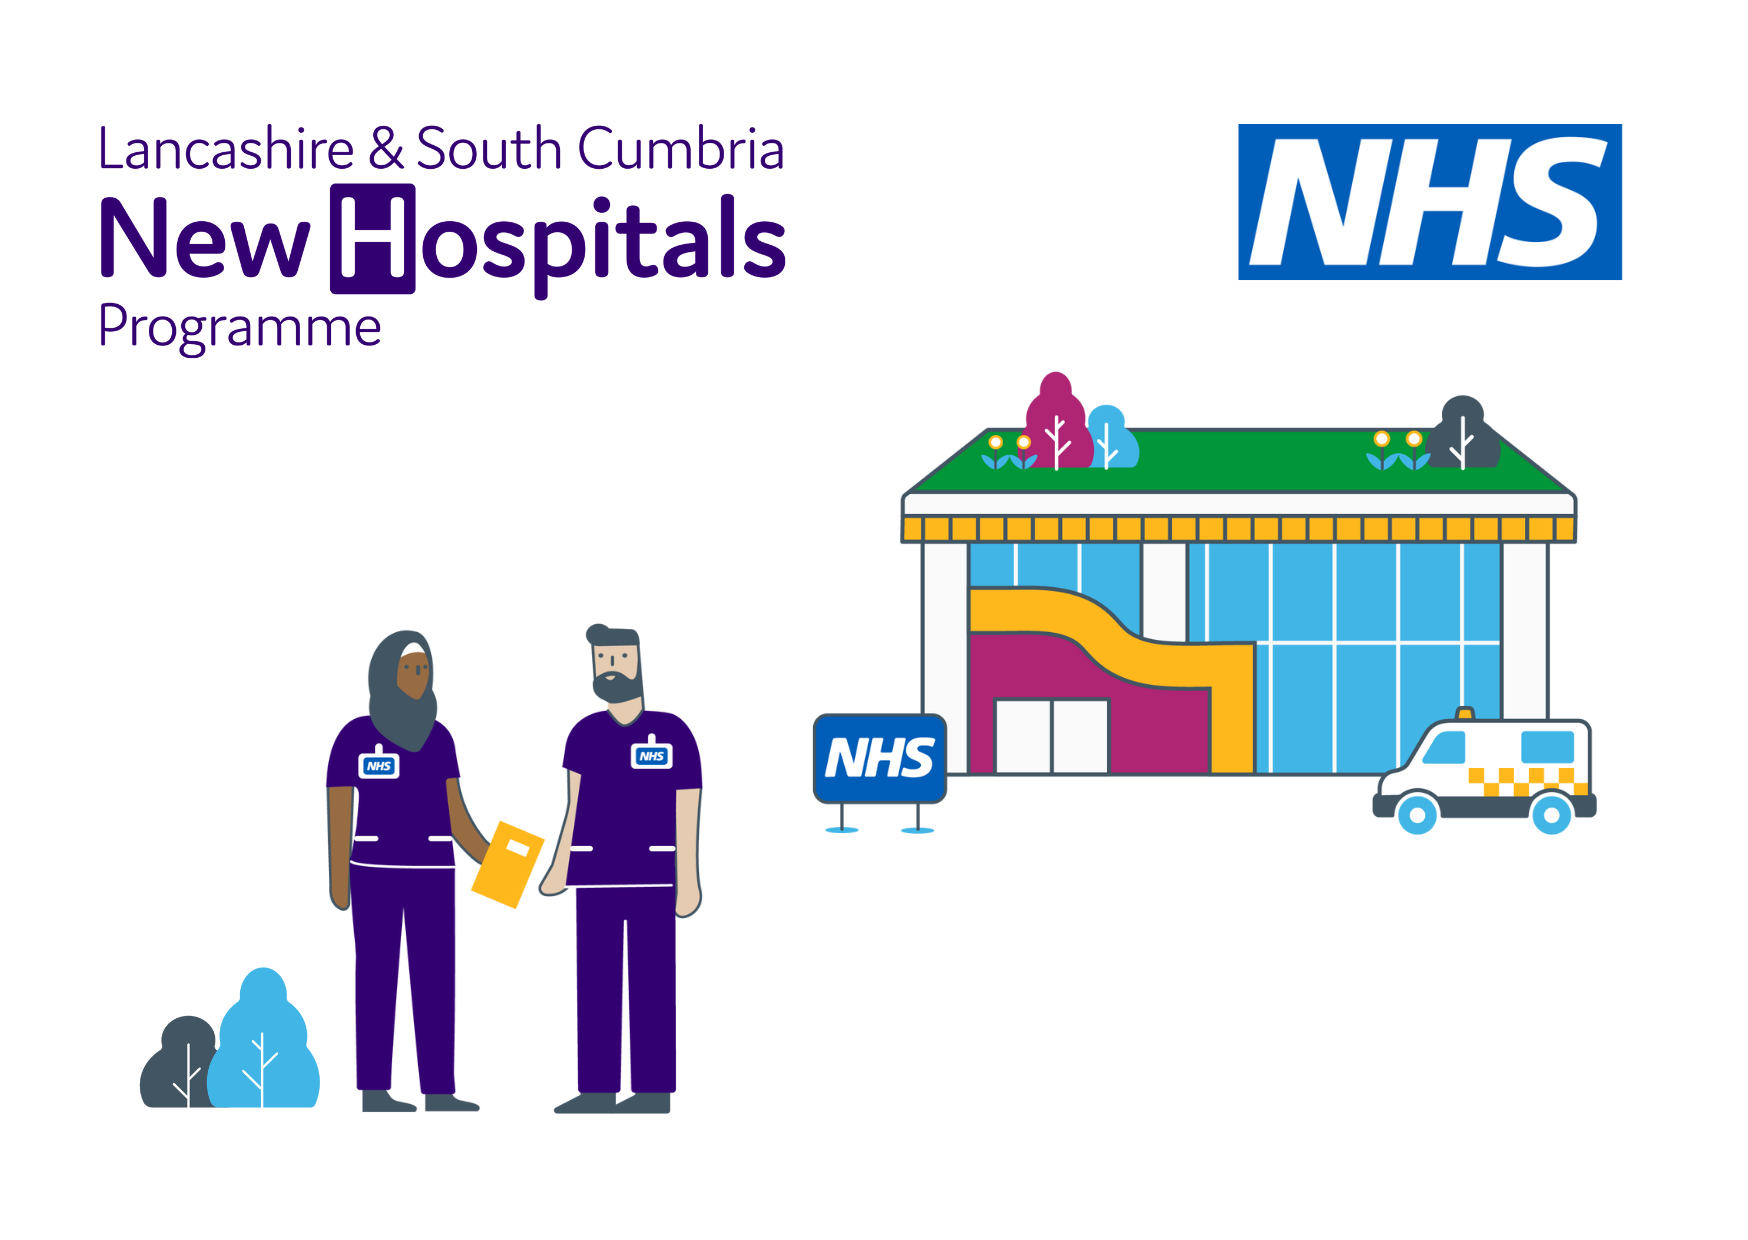 White background, ambulance and hospital, NHS sign in front of it. New Hospitals Programme logo. Two NHS staff conversing. NHS logo on top right corner.